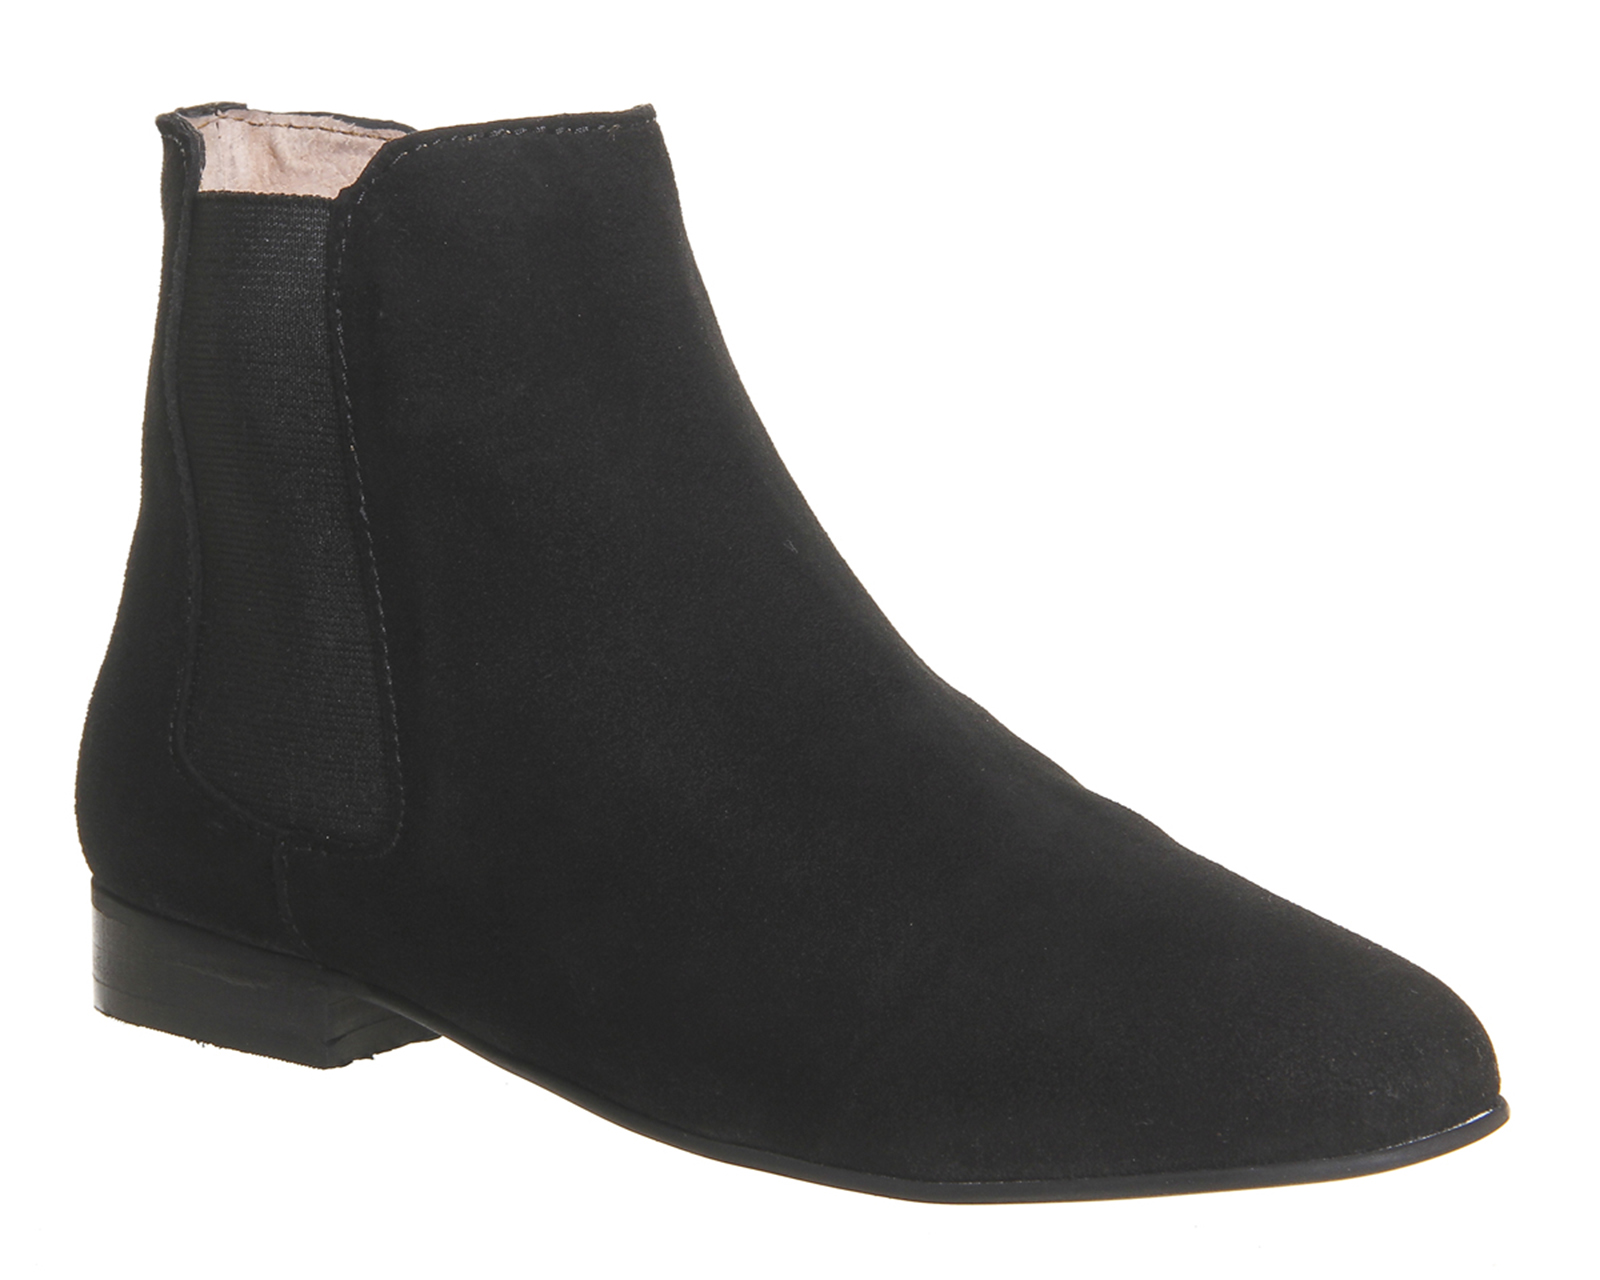 OFFICELincoln Chelsea BootsBlack Suede